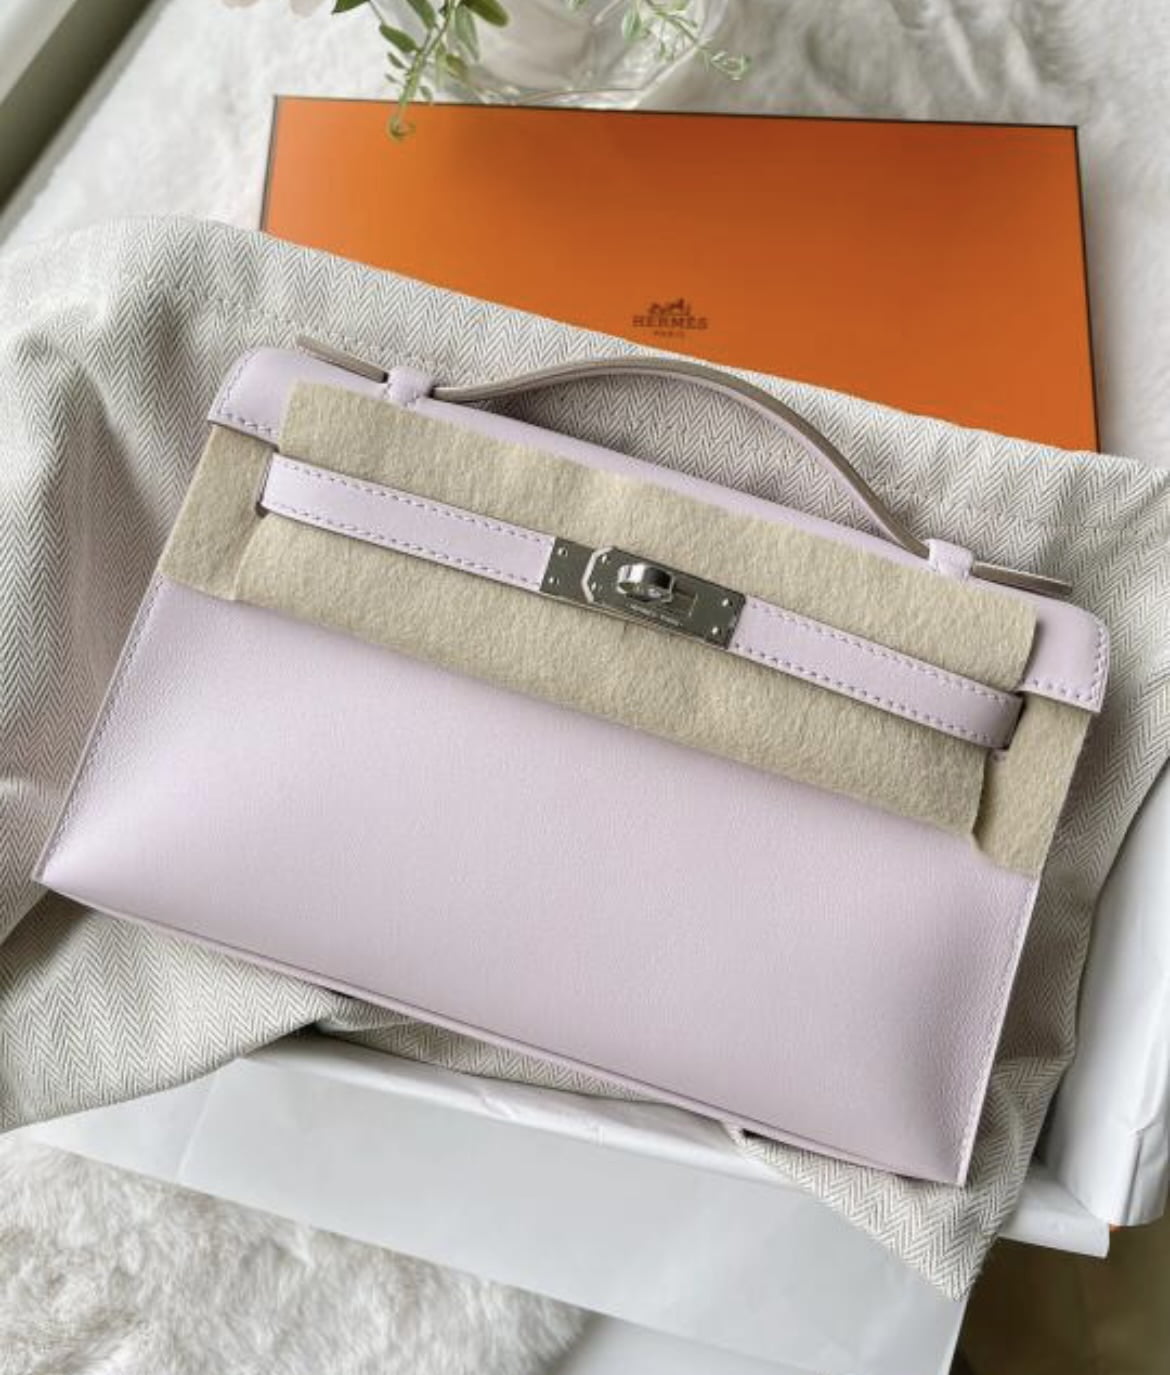 Hermès Chai is the Favorite Color for 2022